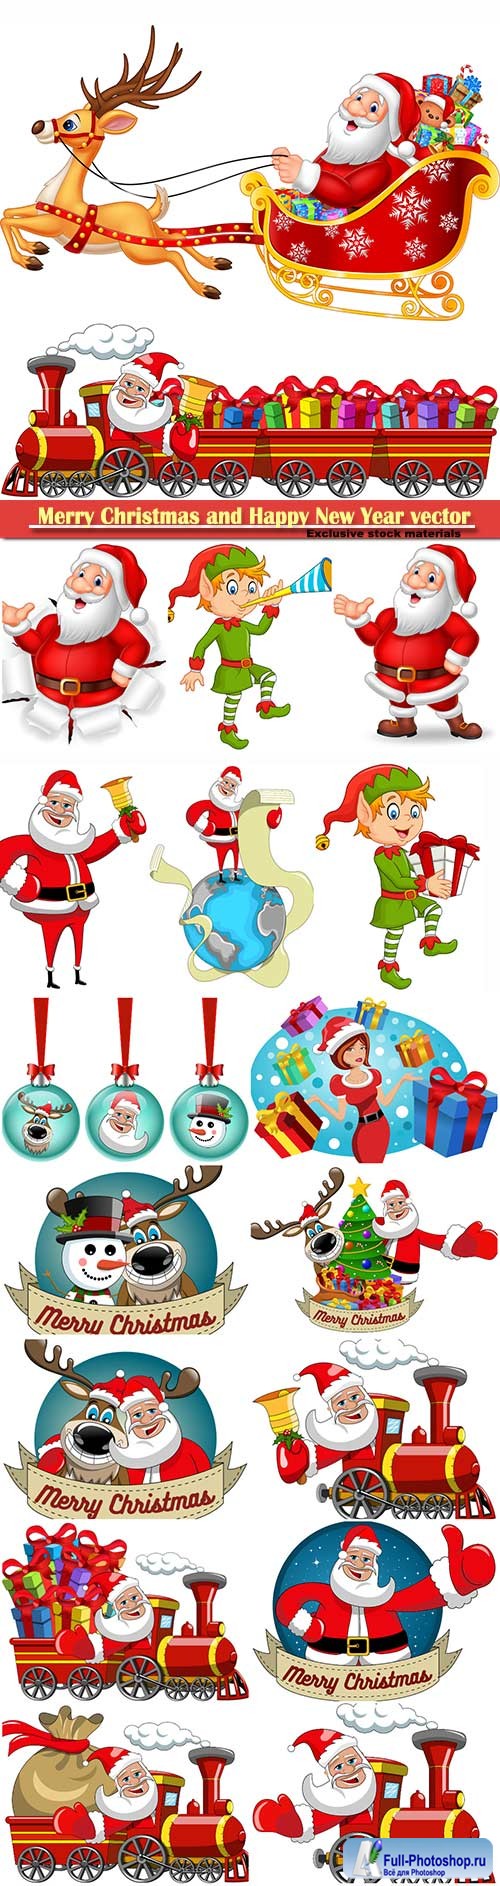 Merry Christmas and Happy New Year vector design # 16